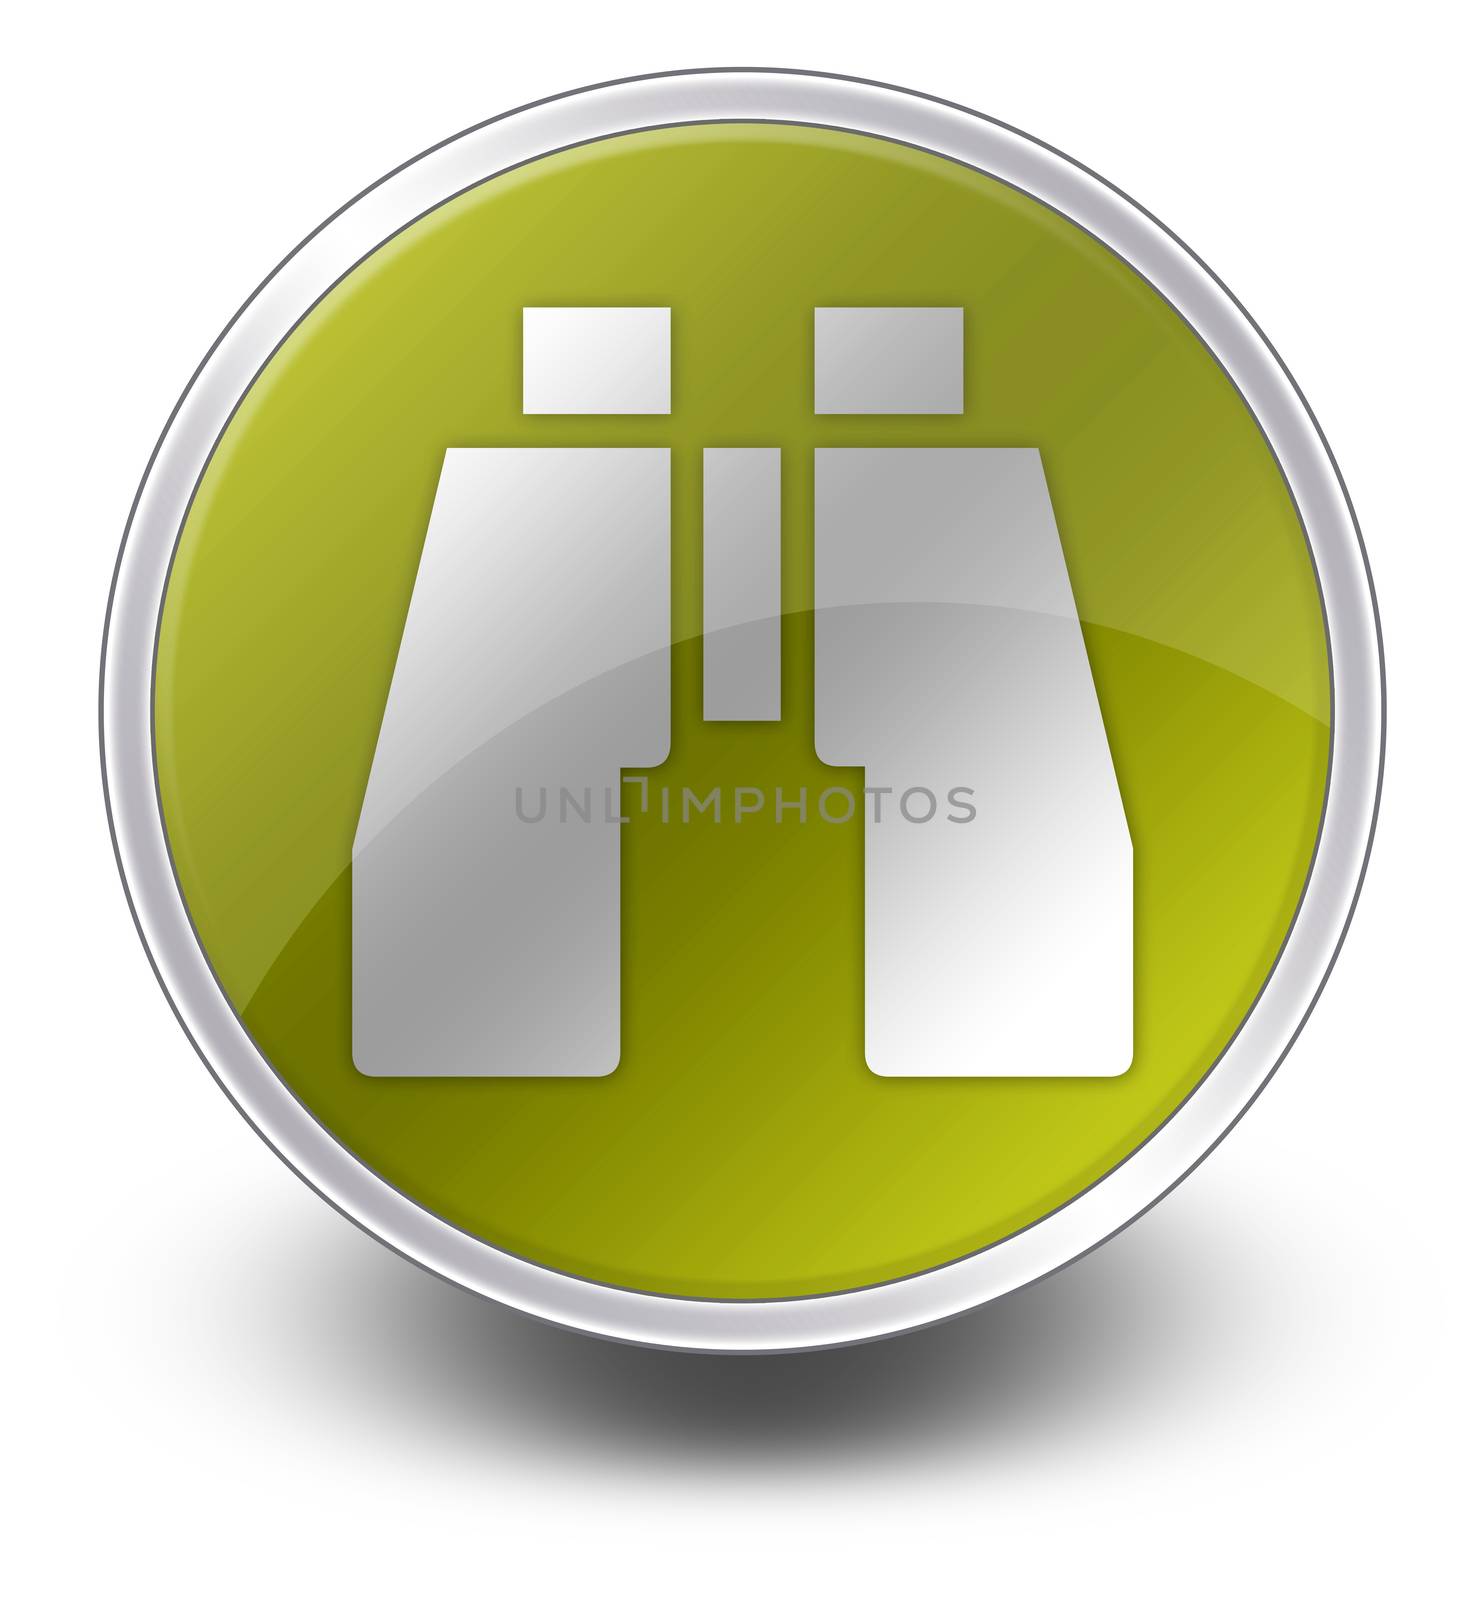 Icon, Button, Pictogram with Wildlife Viewing symbol